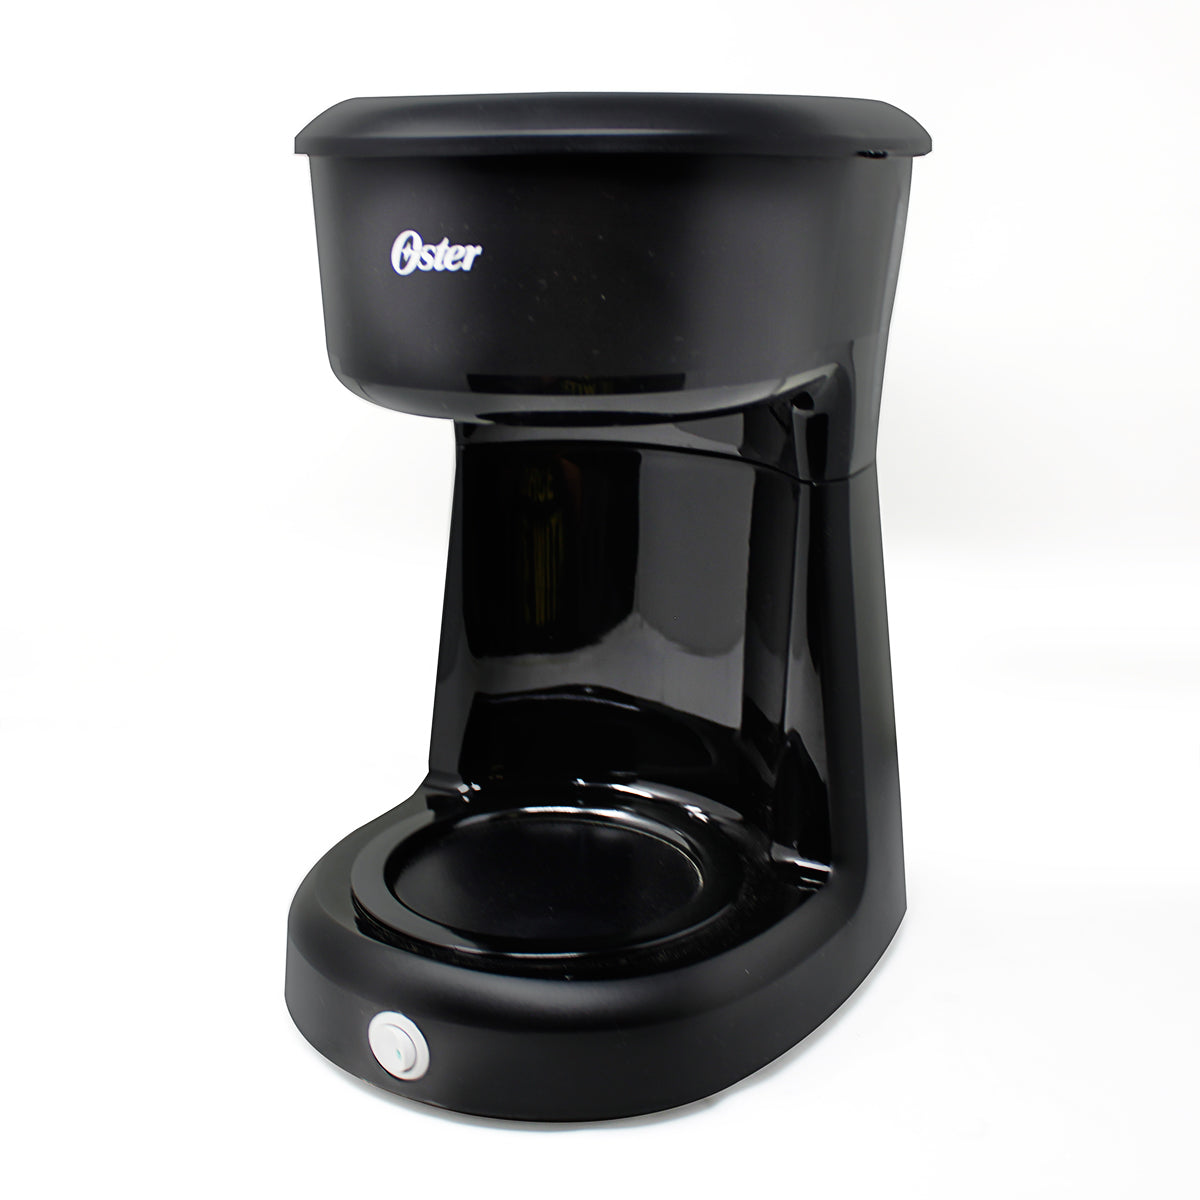 OSTER Cafetera Programable Oster 8 Tazas Bvst